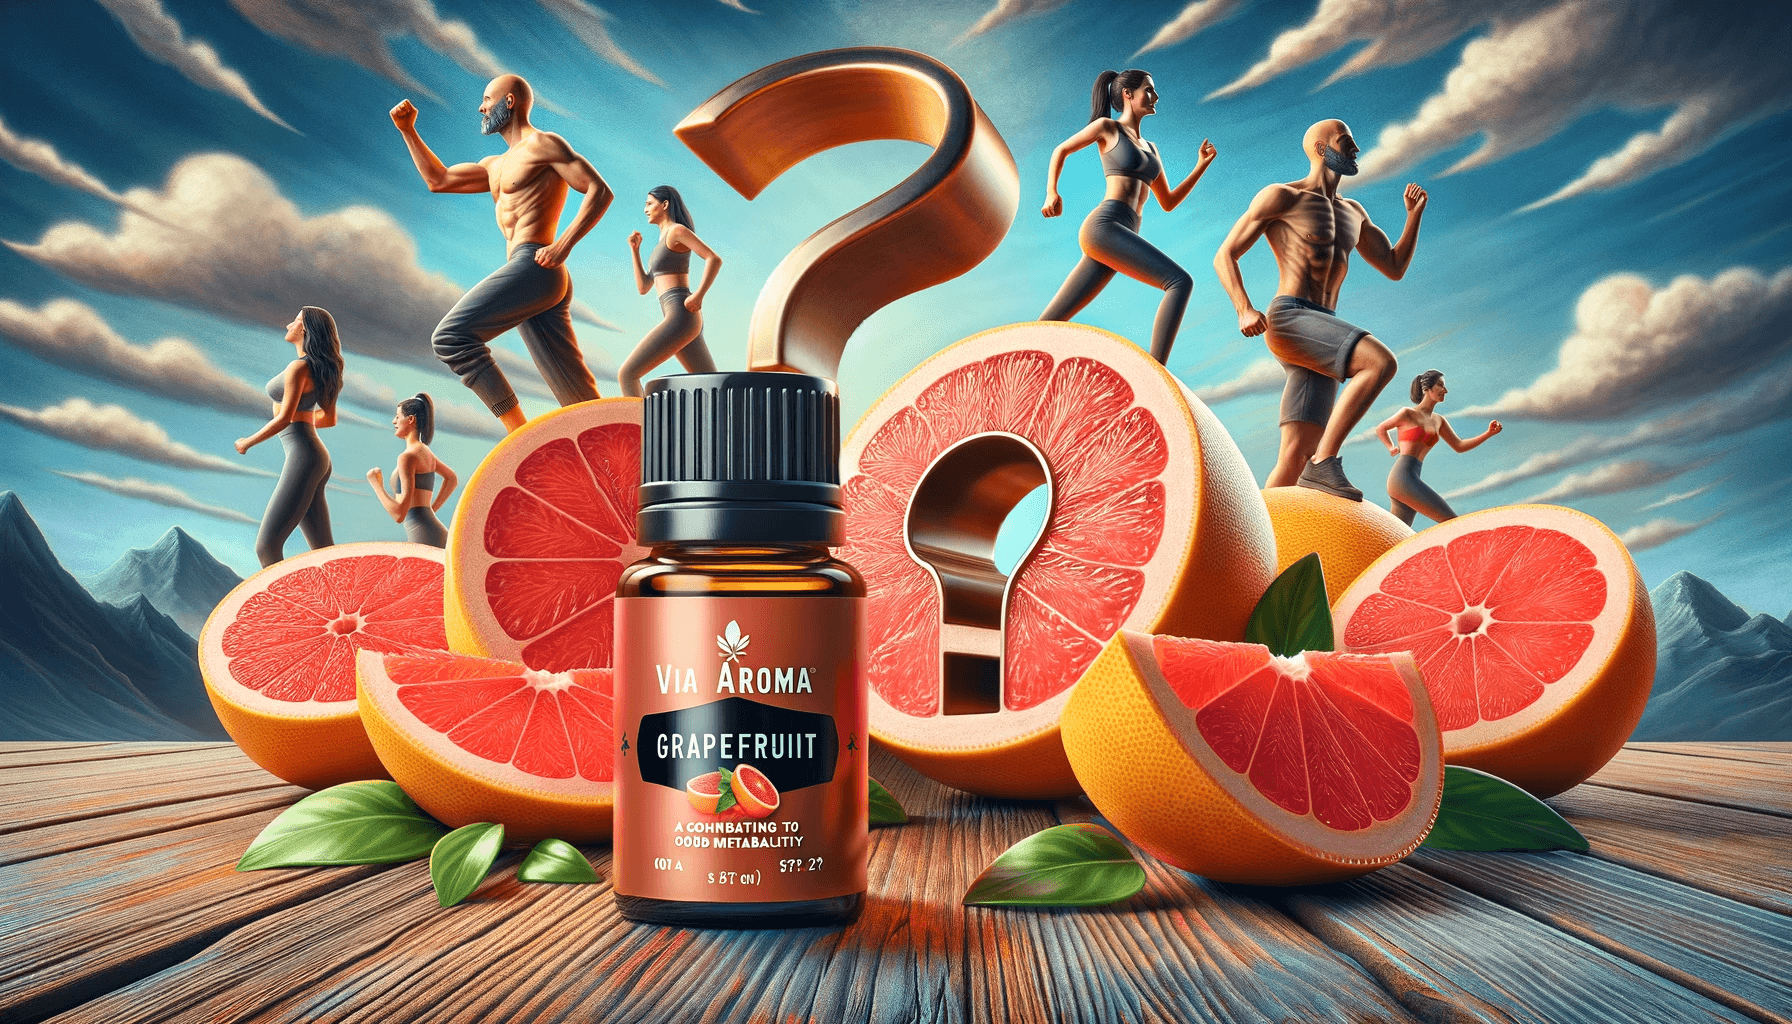 DALL·E 2024 01 23 15.47.55 Revise the dynamic composition by replacing the imagery of people with question marks maintaining the focus on Via Aroma grapefruit essential oil and